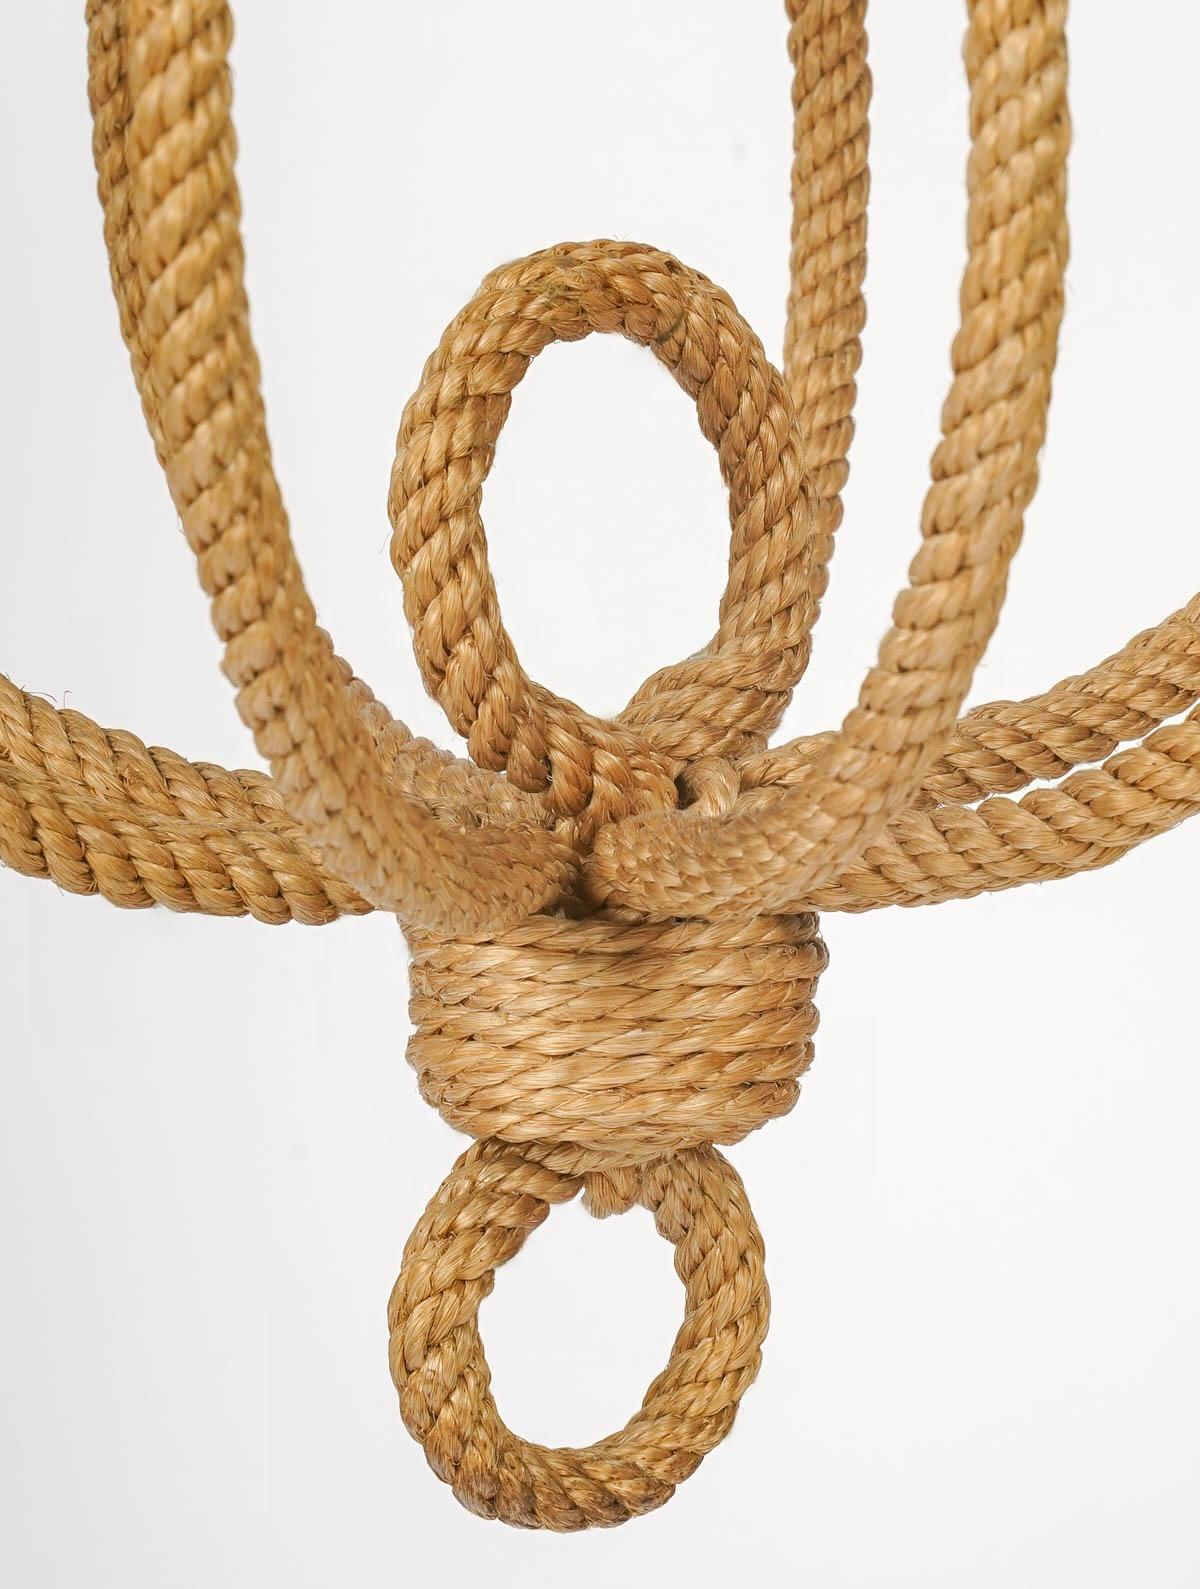 Rope 1950 Lantern corde by Adrien Audoux and Frida Minet